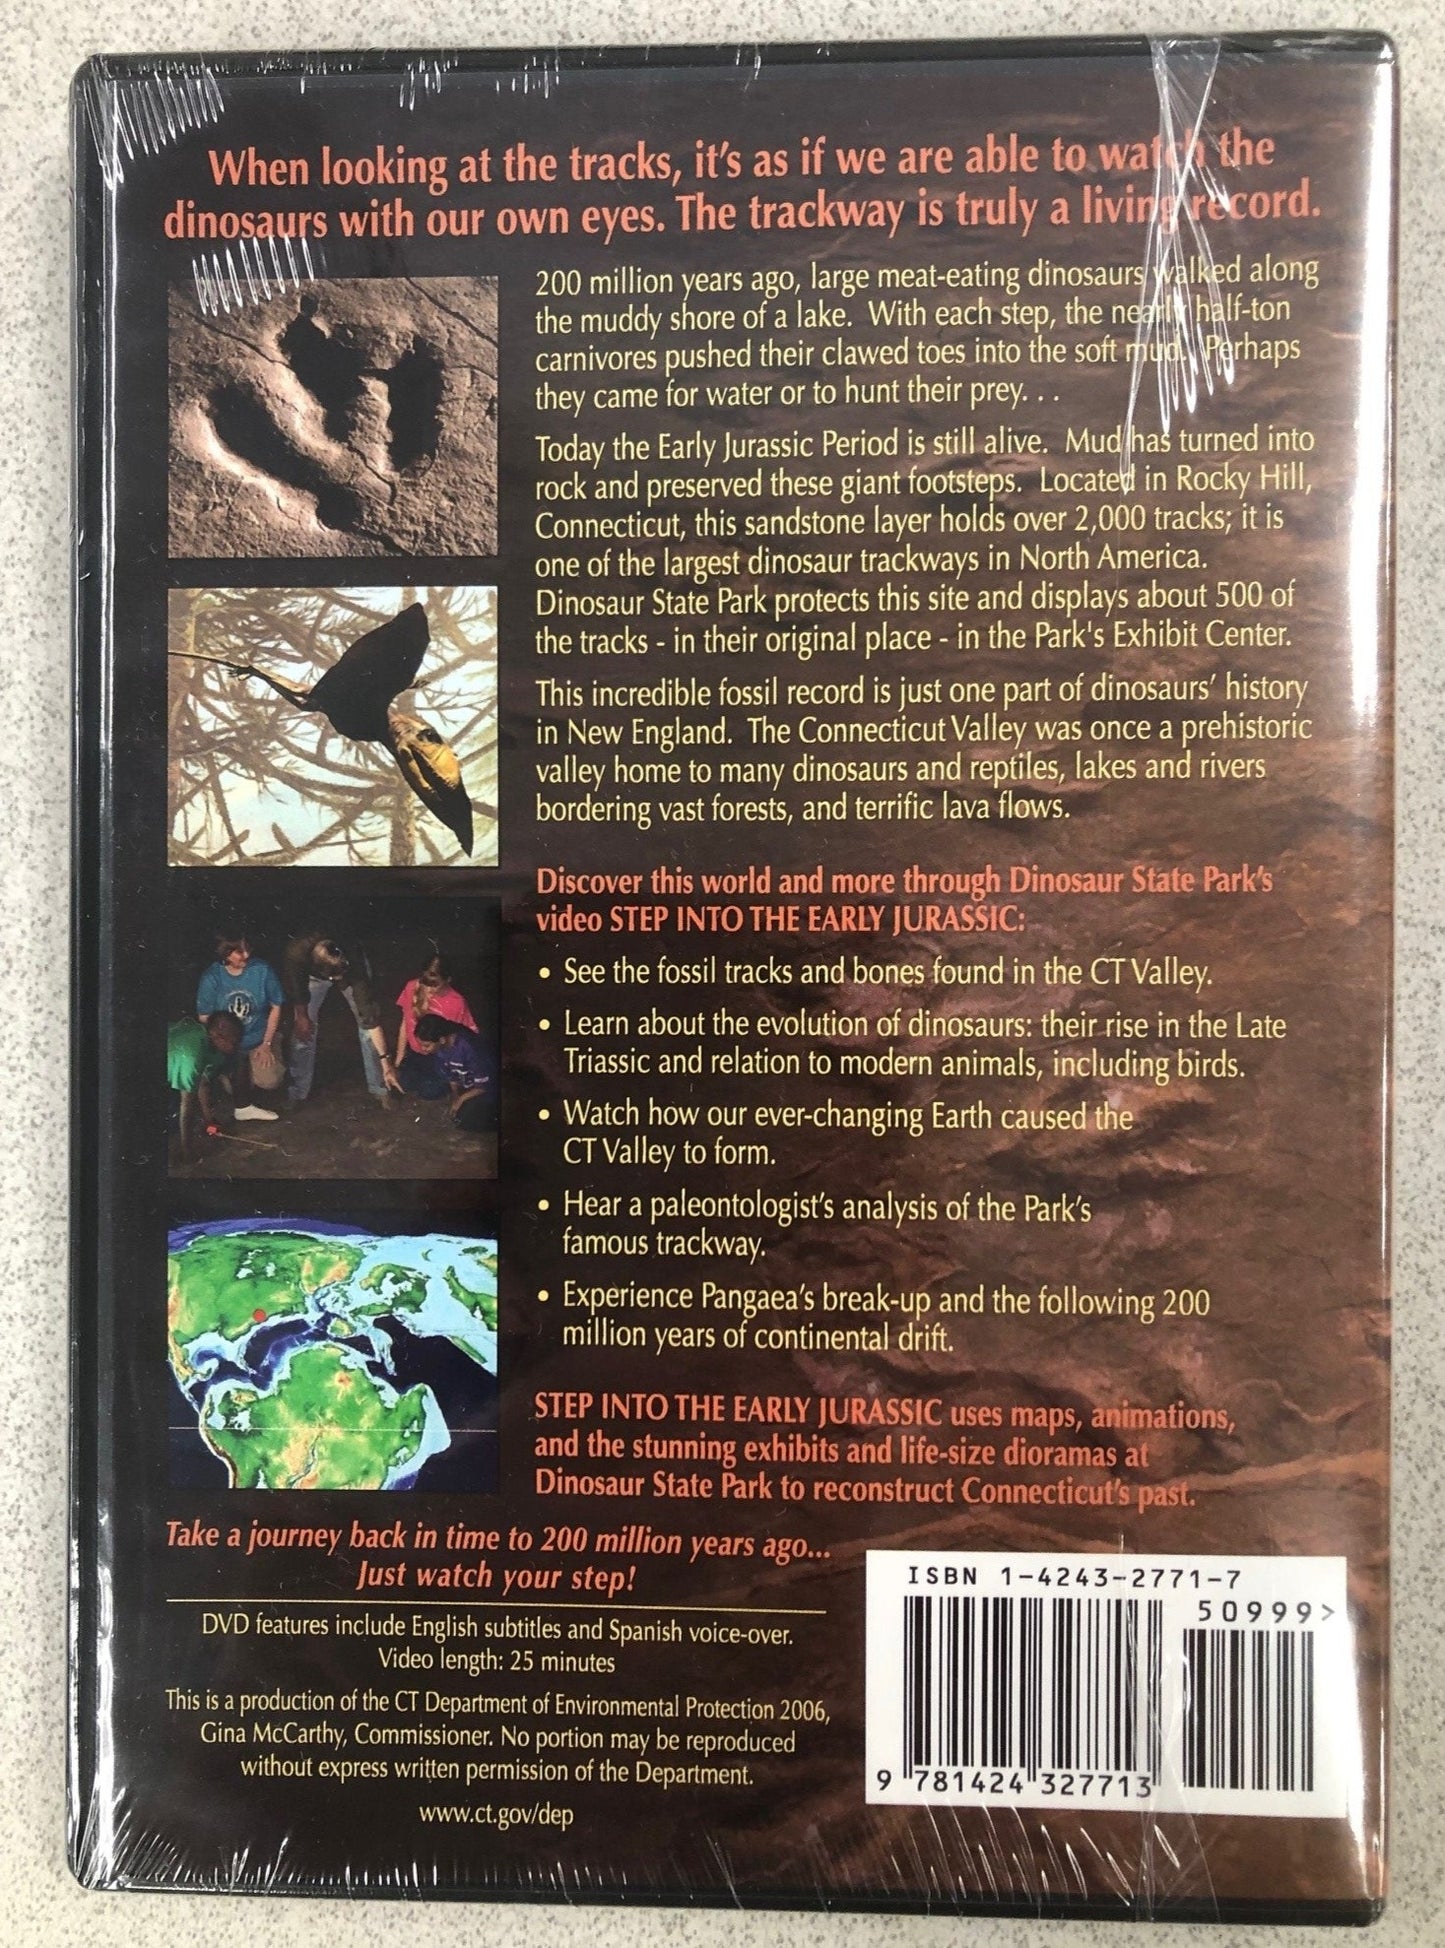 Step into the Early Jurassic (DVD)